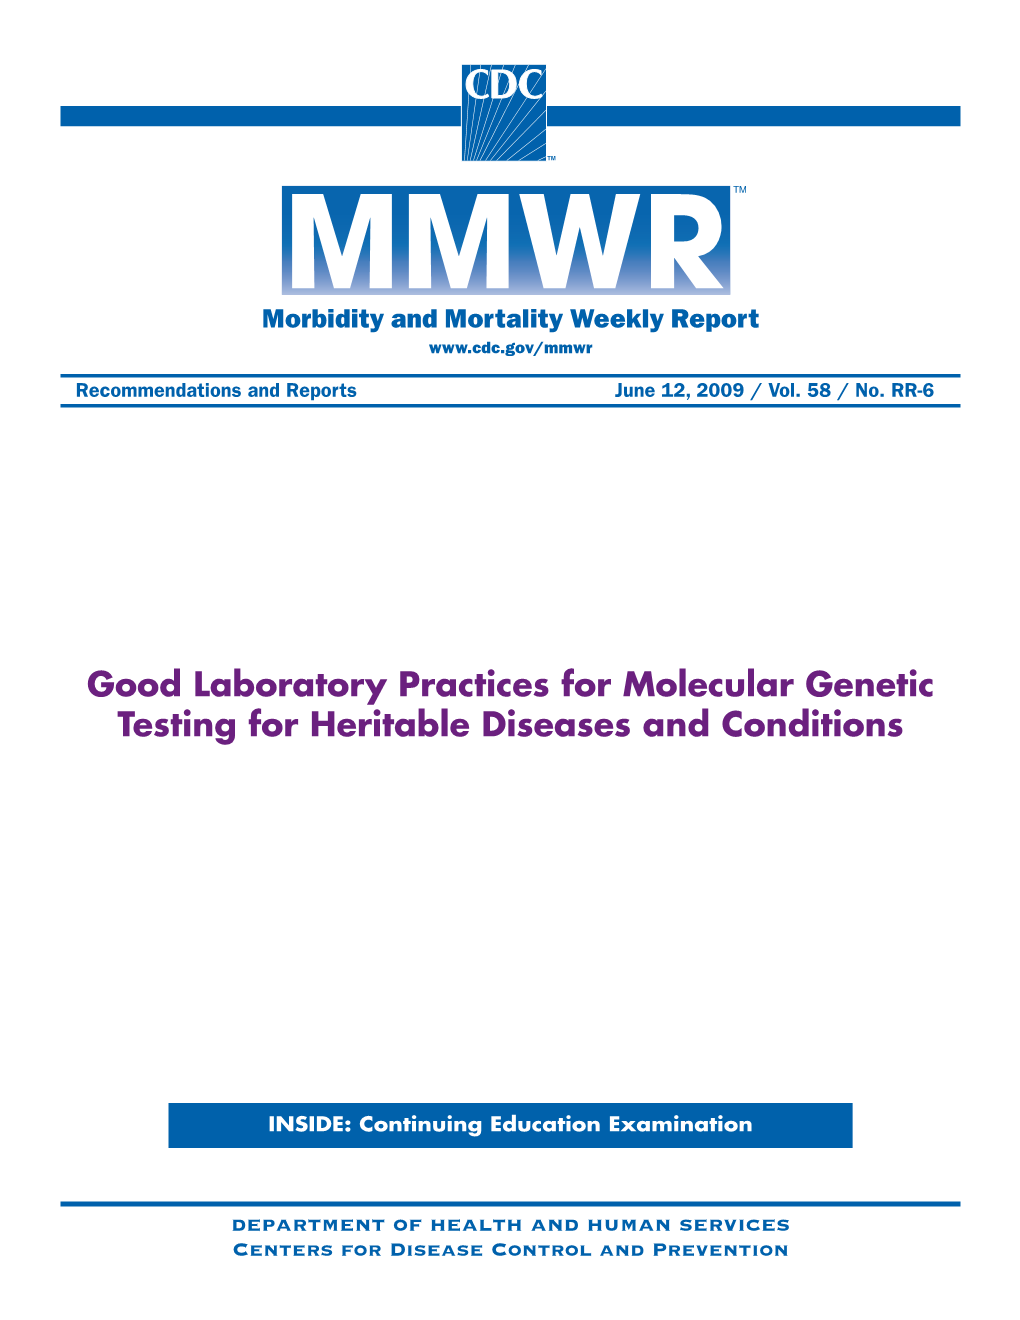 Good Laboratory Practices for Molecular Genetic Testing for Heritable Diseases and Conditions